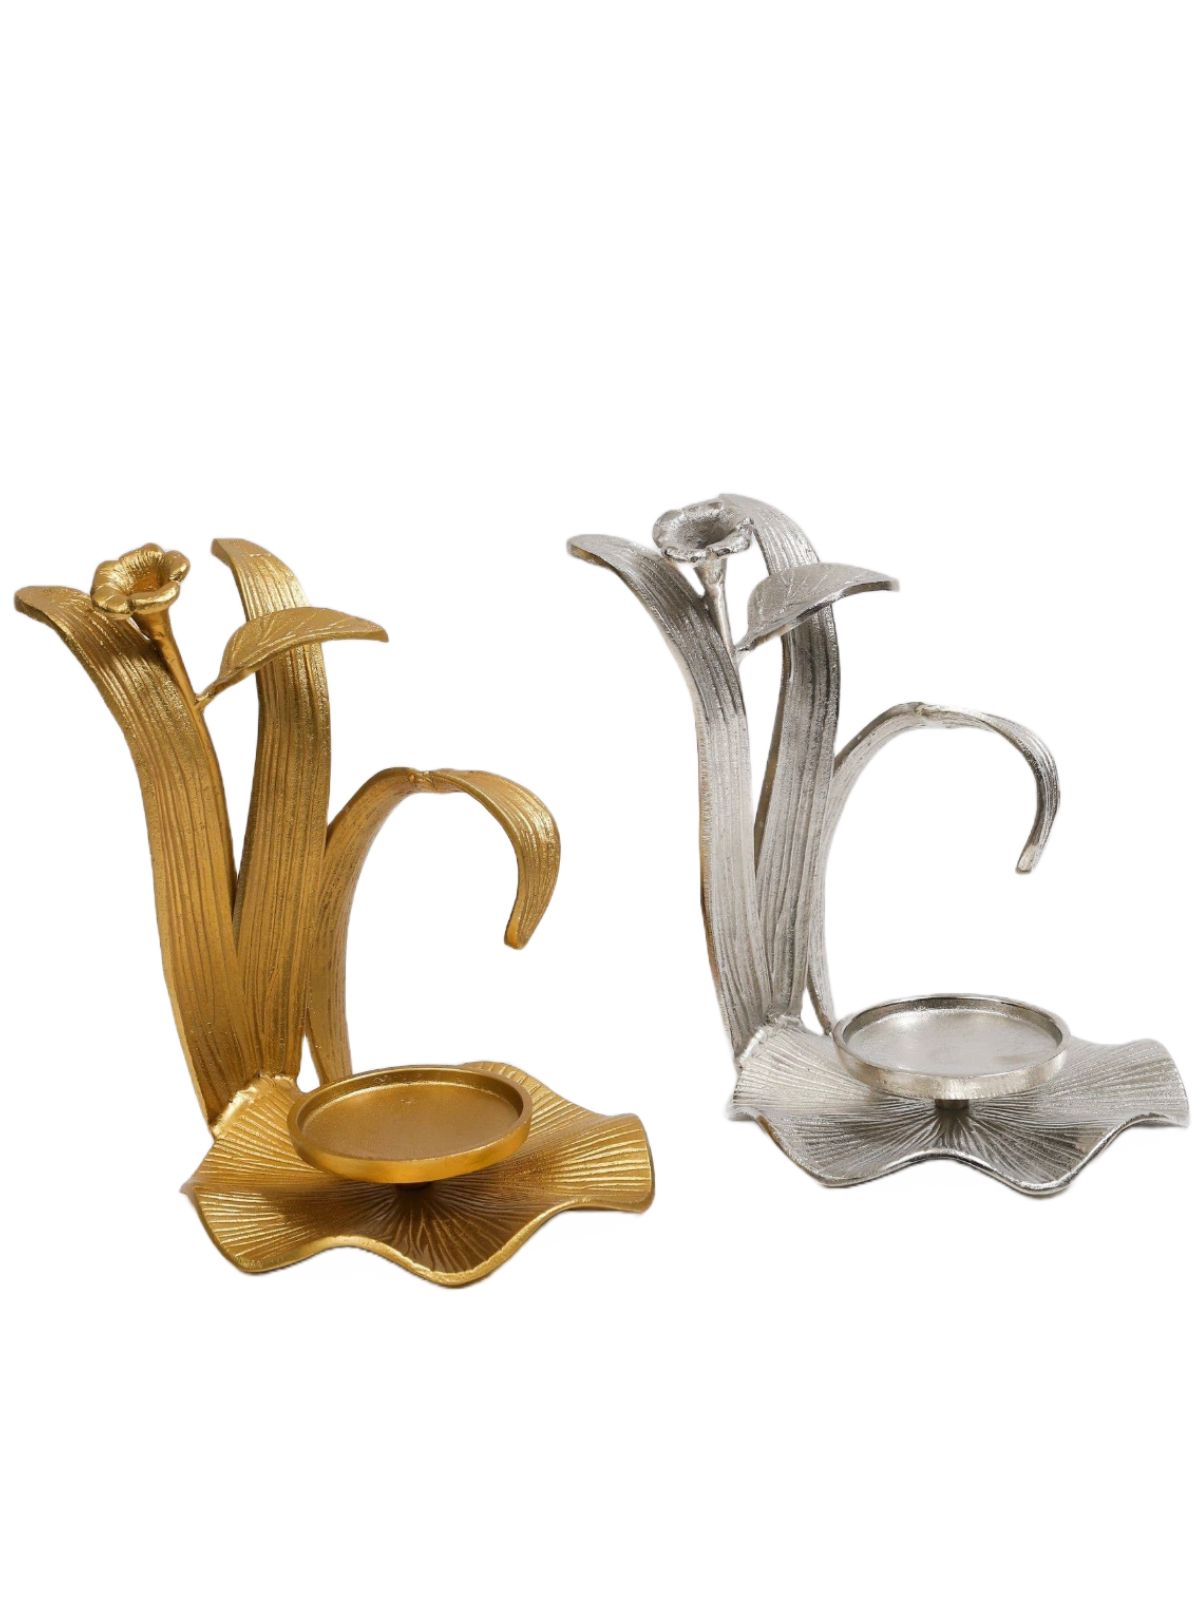 12H Hurricane Candle Holders with Flower Design. Available in 2 Colors, Sold By KYA Home Decor.